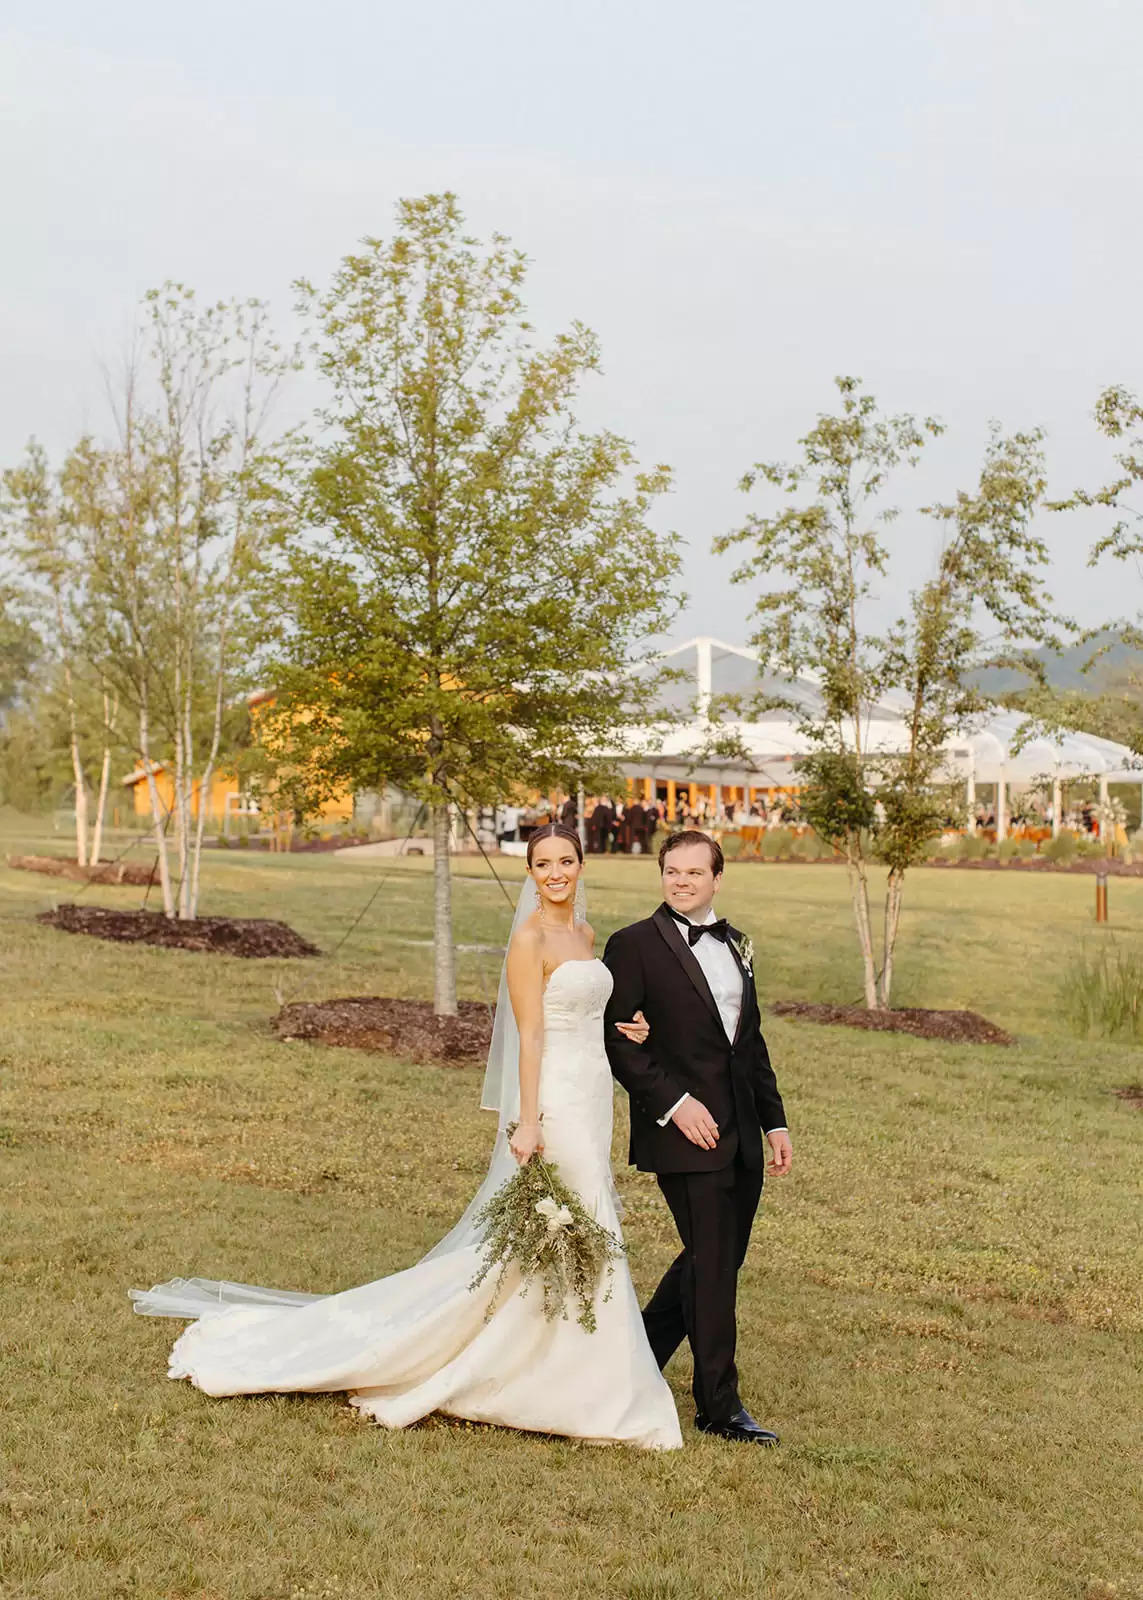 An Upscale, Down-home Tennessee Marriage ceremony at Southall Farm & Inn ⋆ Ruffled